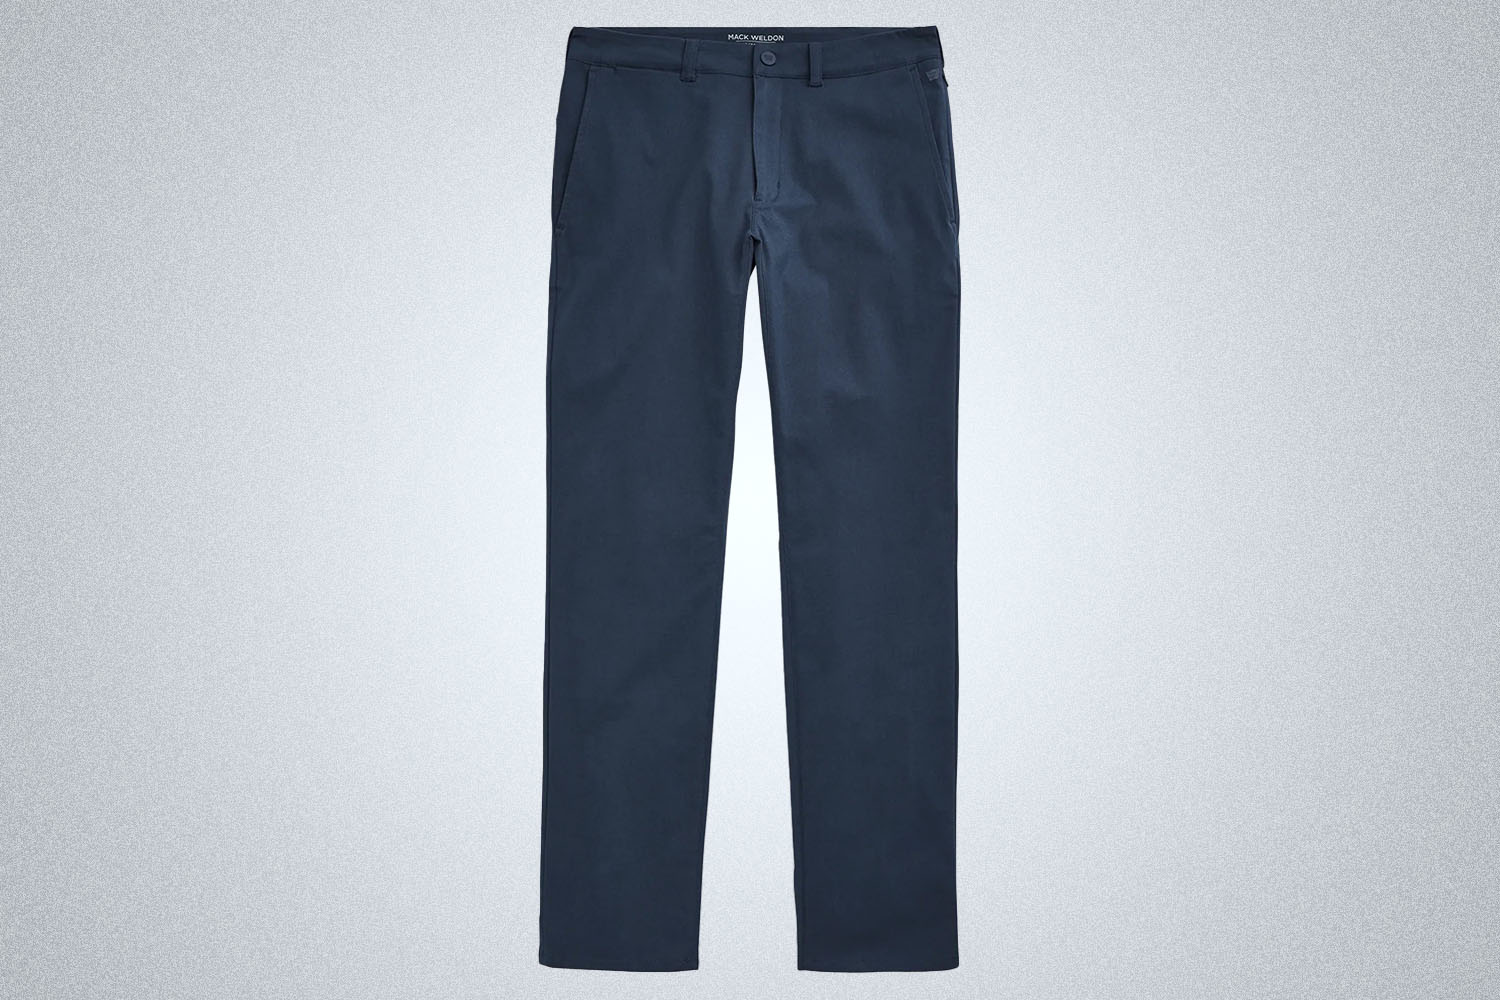 a pair of navy colored chinos from Mack Weldon on a grey background